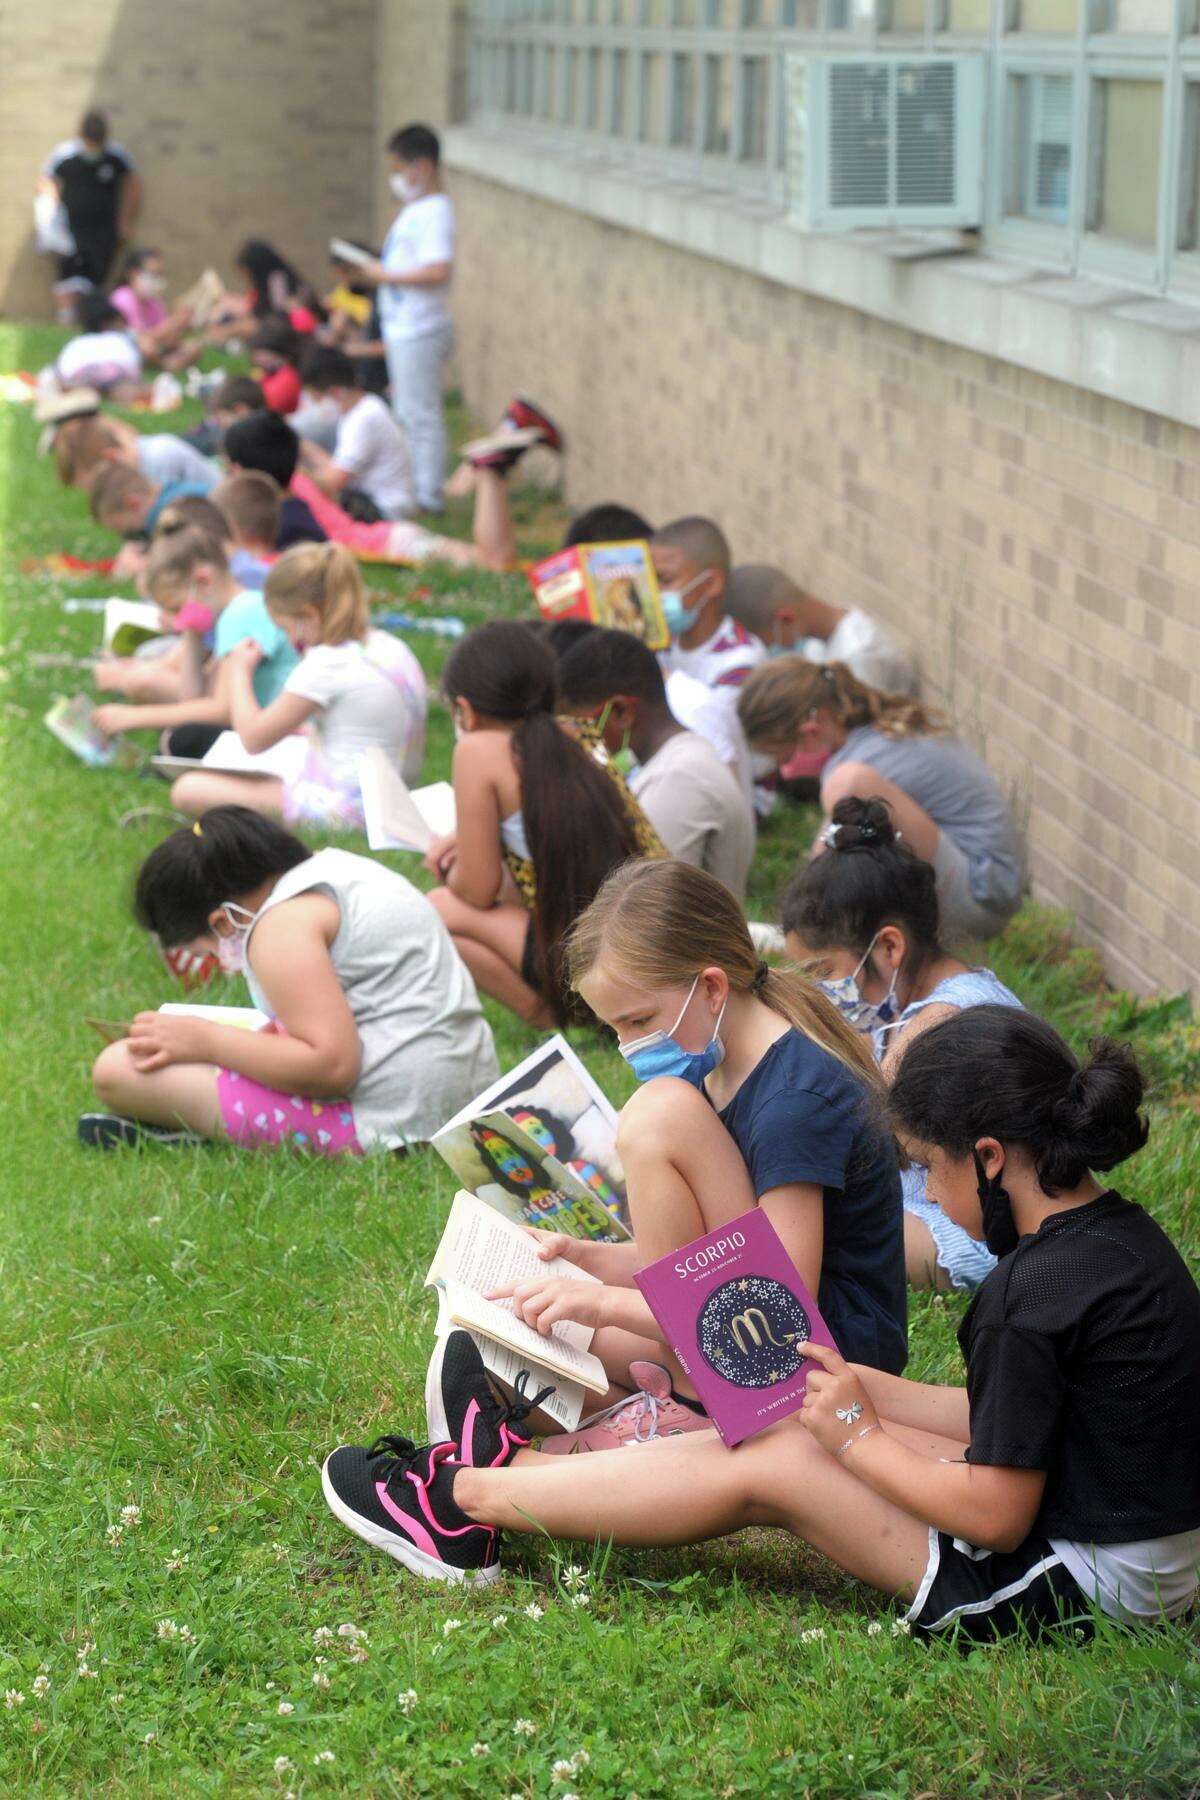 Students read in the shade of their school building on a sweltering morning as they take part in the kickoff event for the summer reading program at Long Hill School, in Shelton, Conn. June 8, 2021.